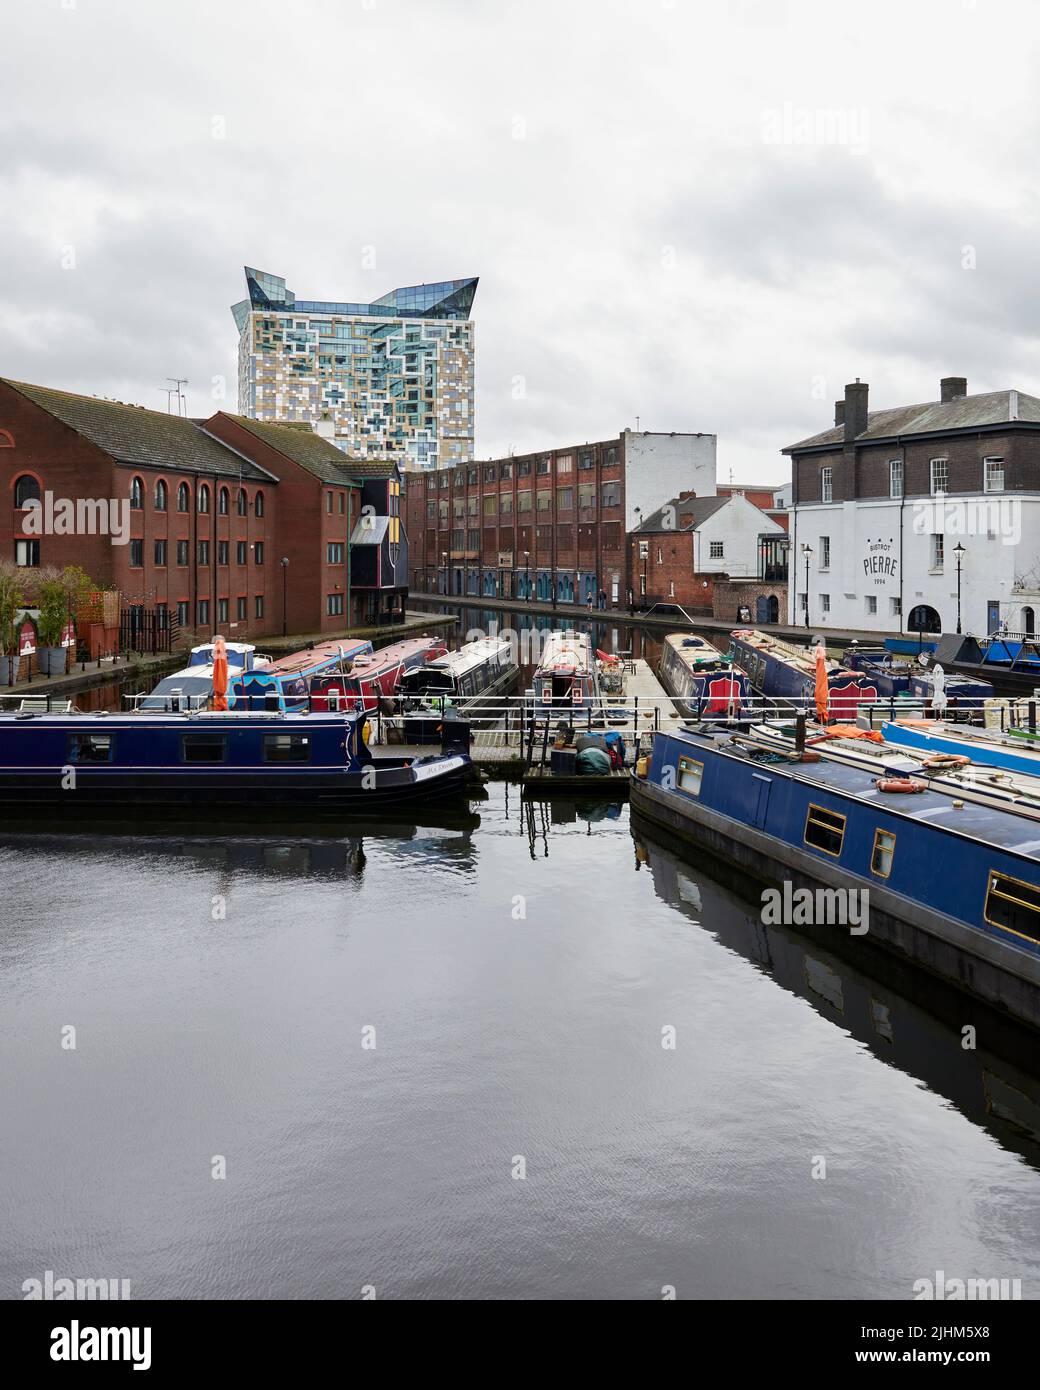 Birmingham, England with canal boats in the foreground and the Cube in the background Stock Photo